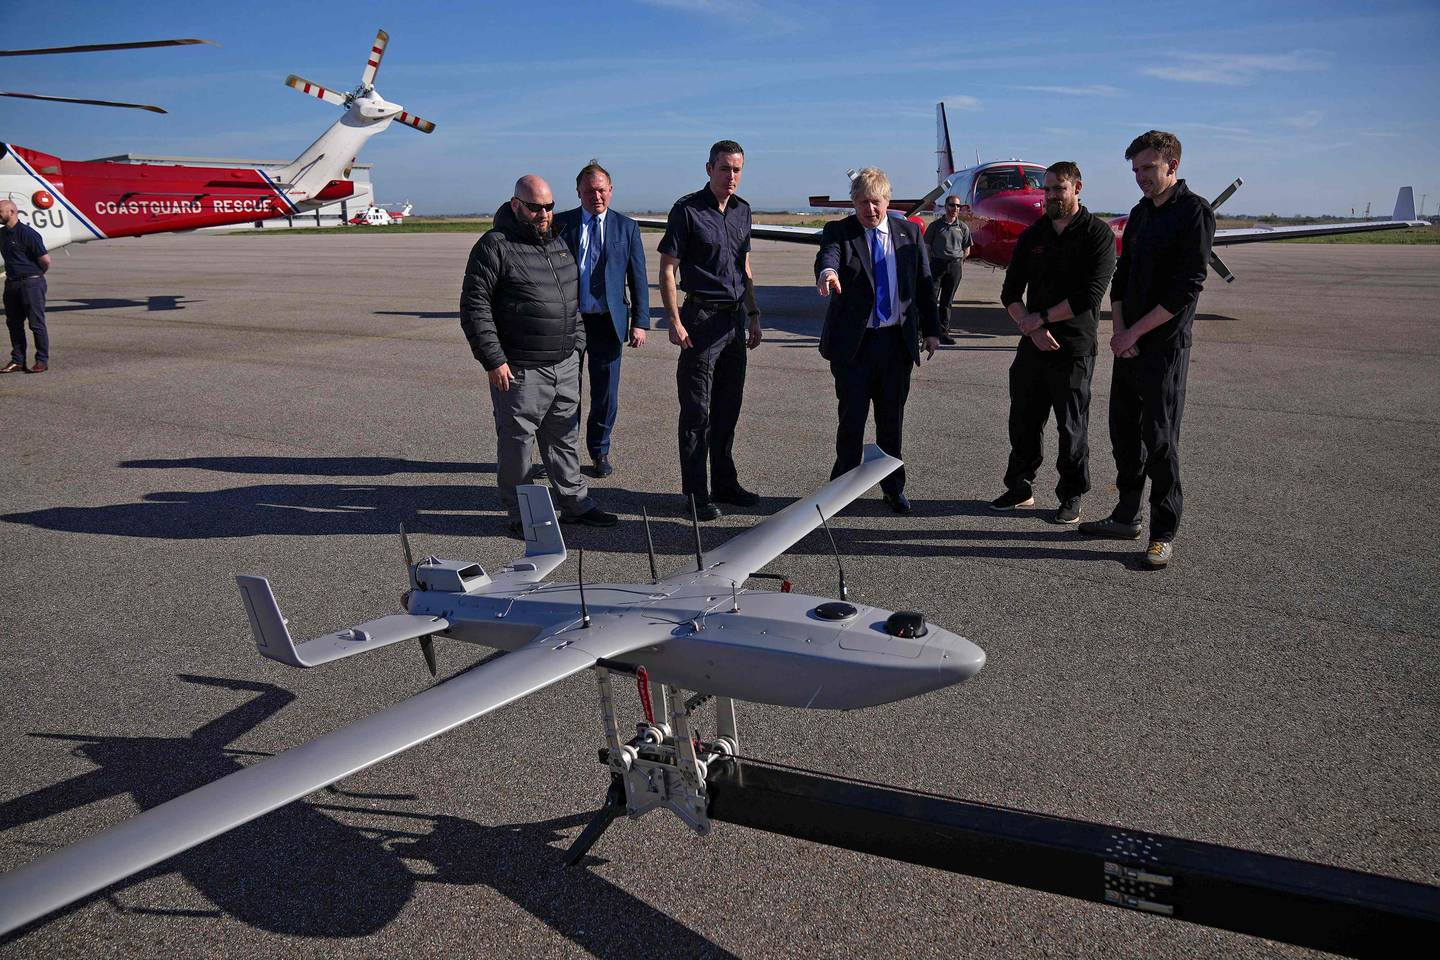 Prime Minister Boris Johnson views a Coastguard drone used for surveillance at Lydd Airport in Dover, England. AFP